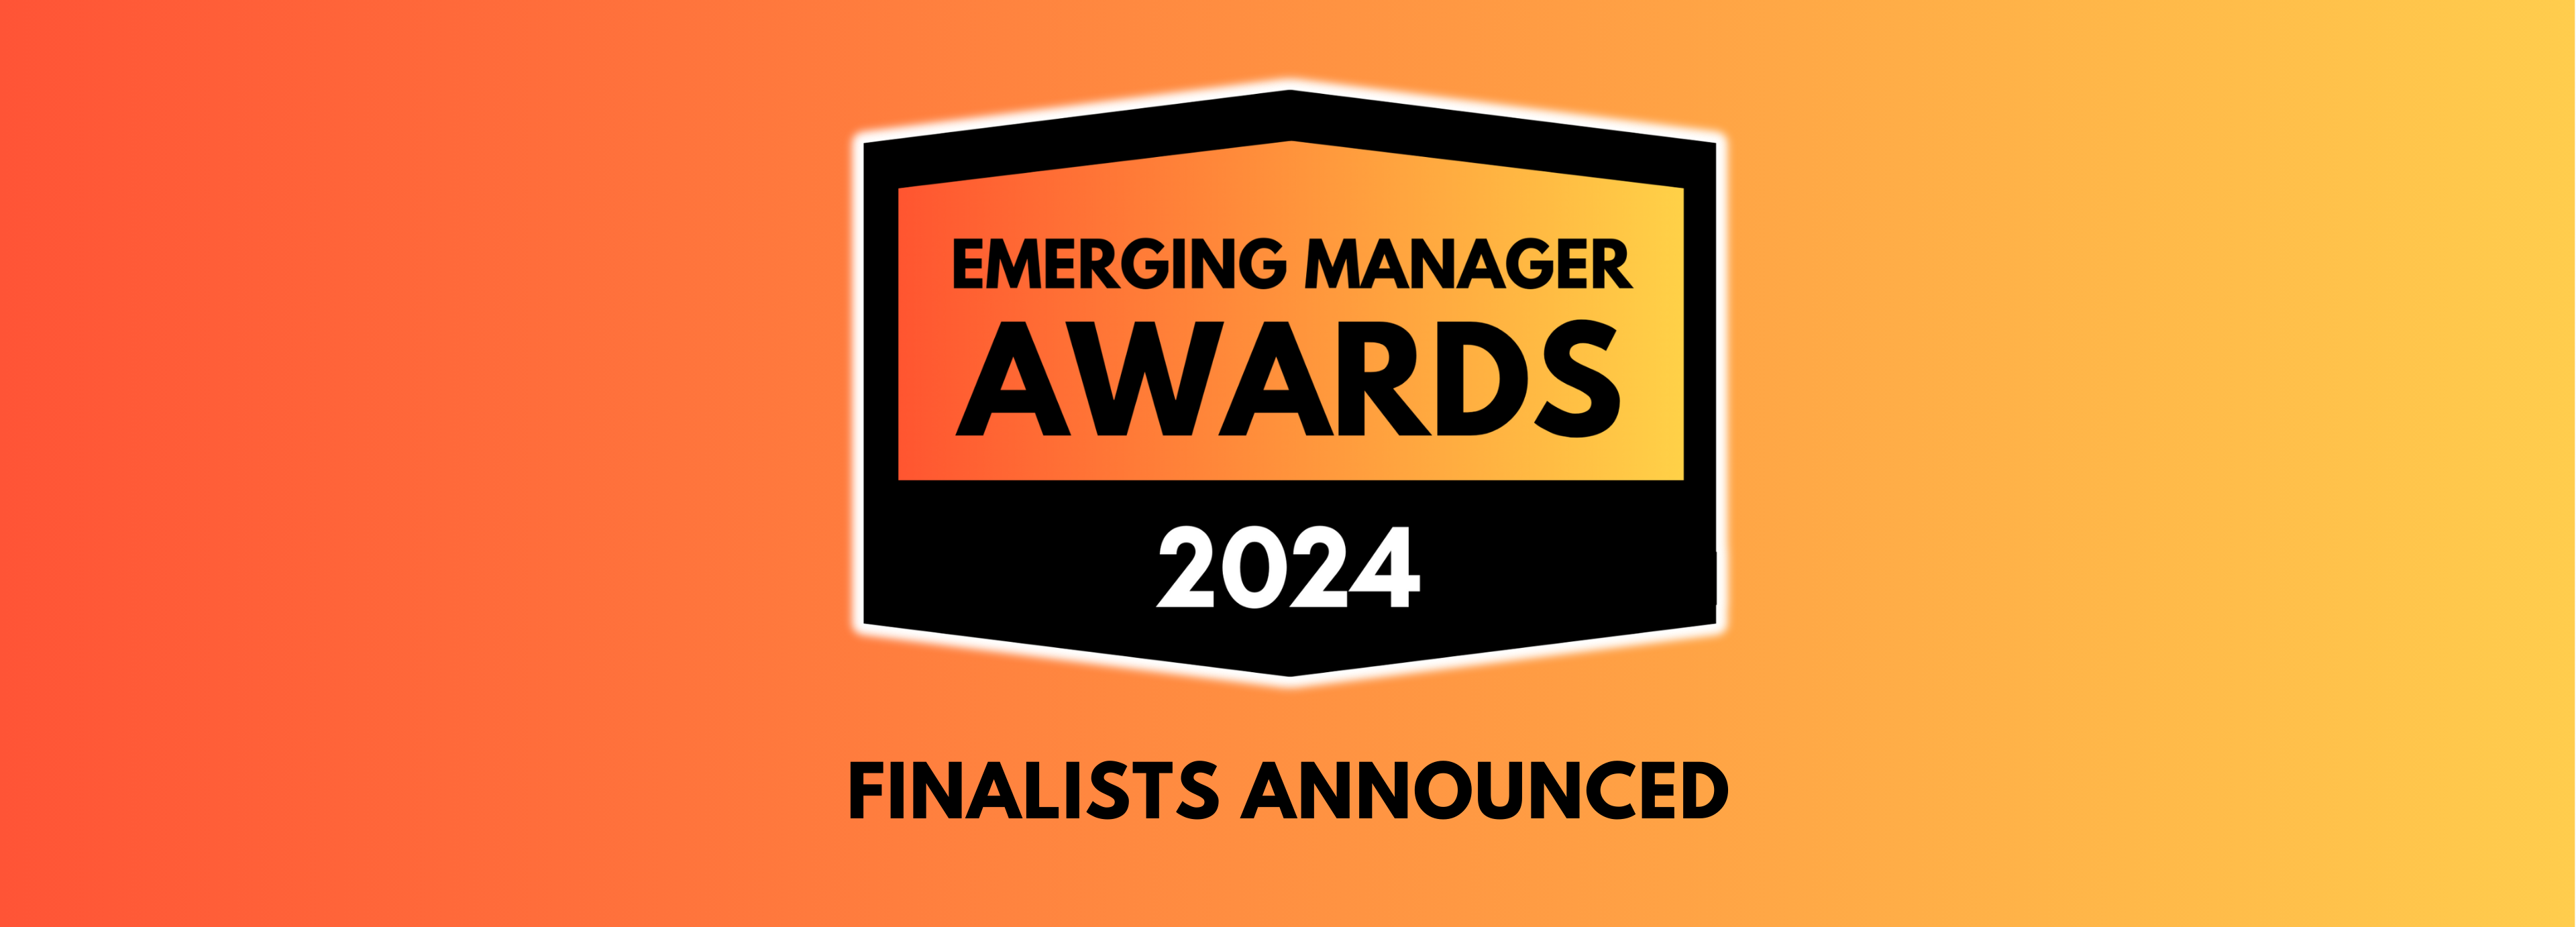 2024 Emerging Manager Awards Finalists Announced